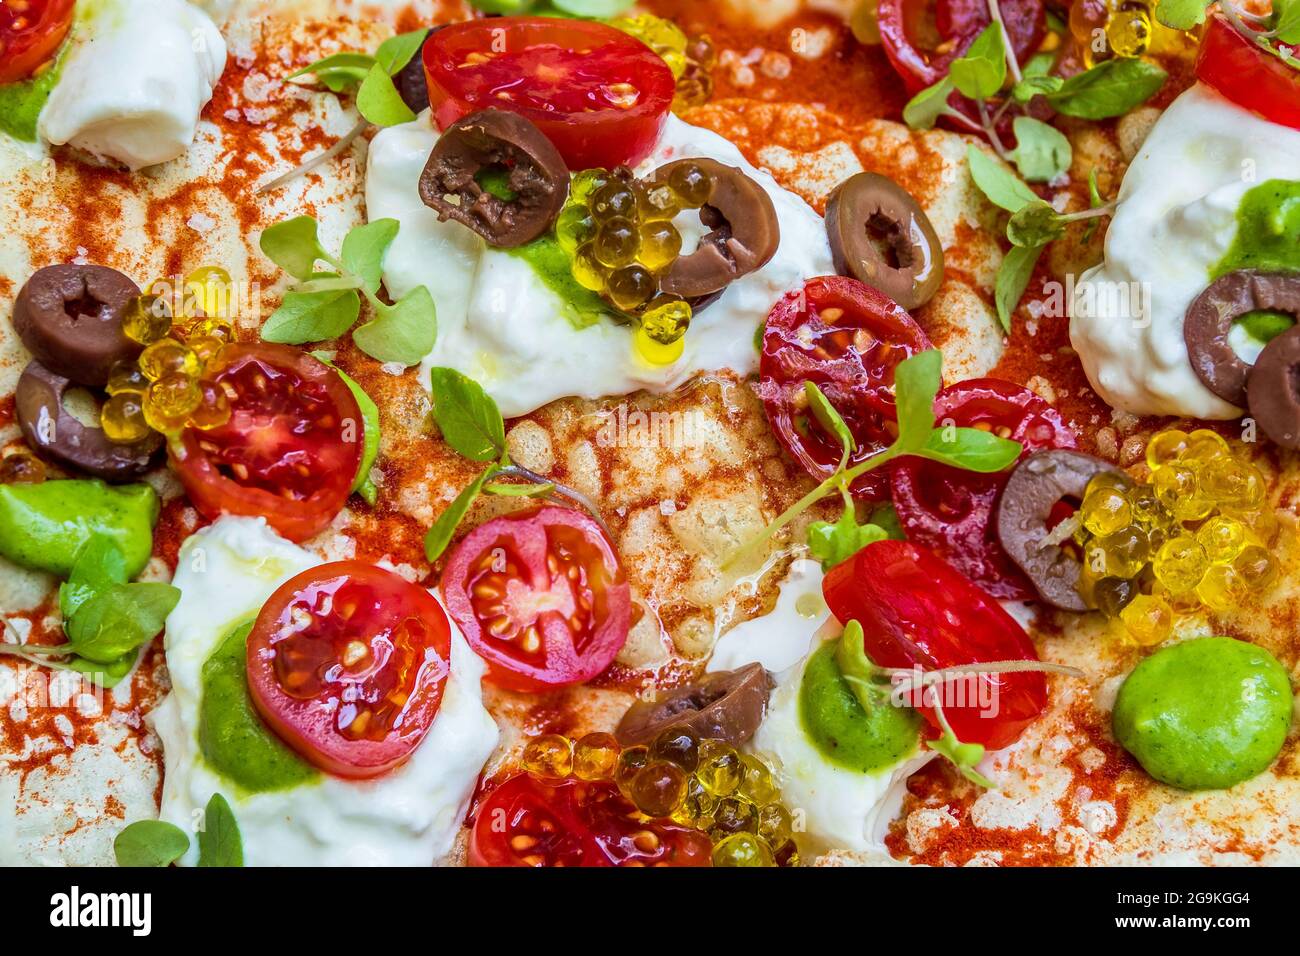 detail of a pizza with bright colors Stock Photo